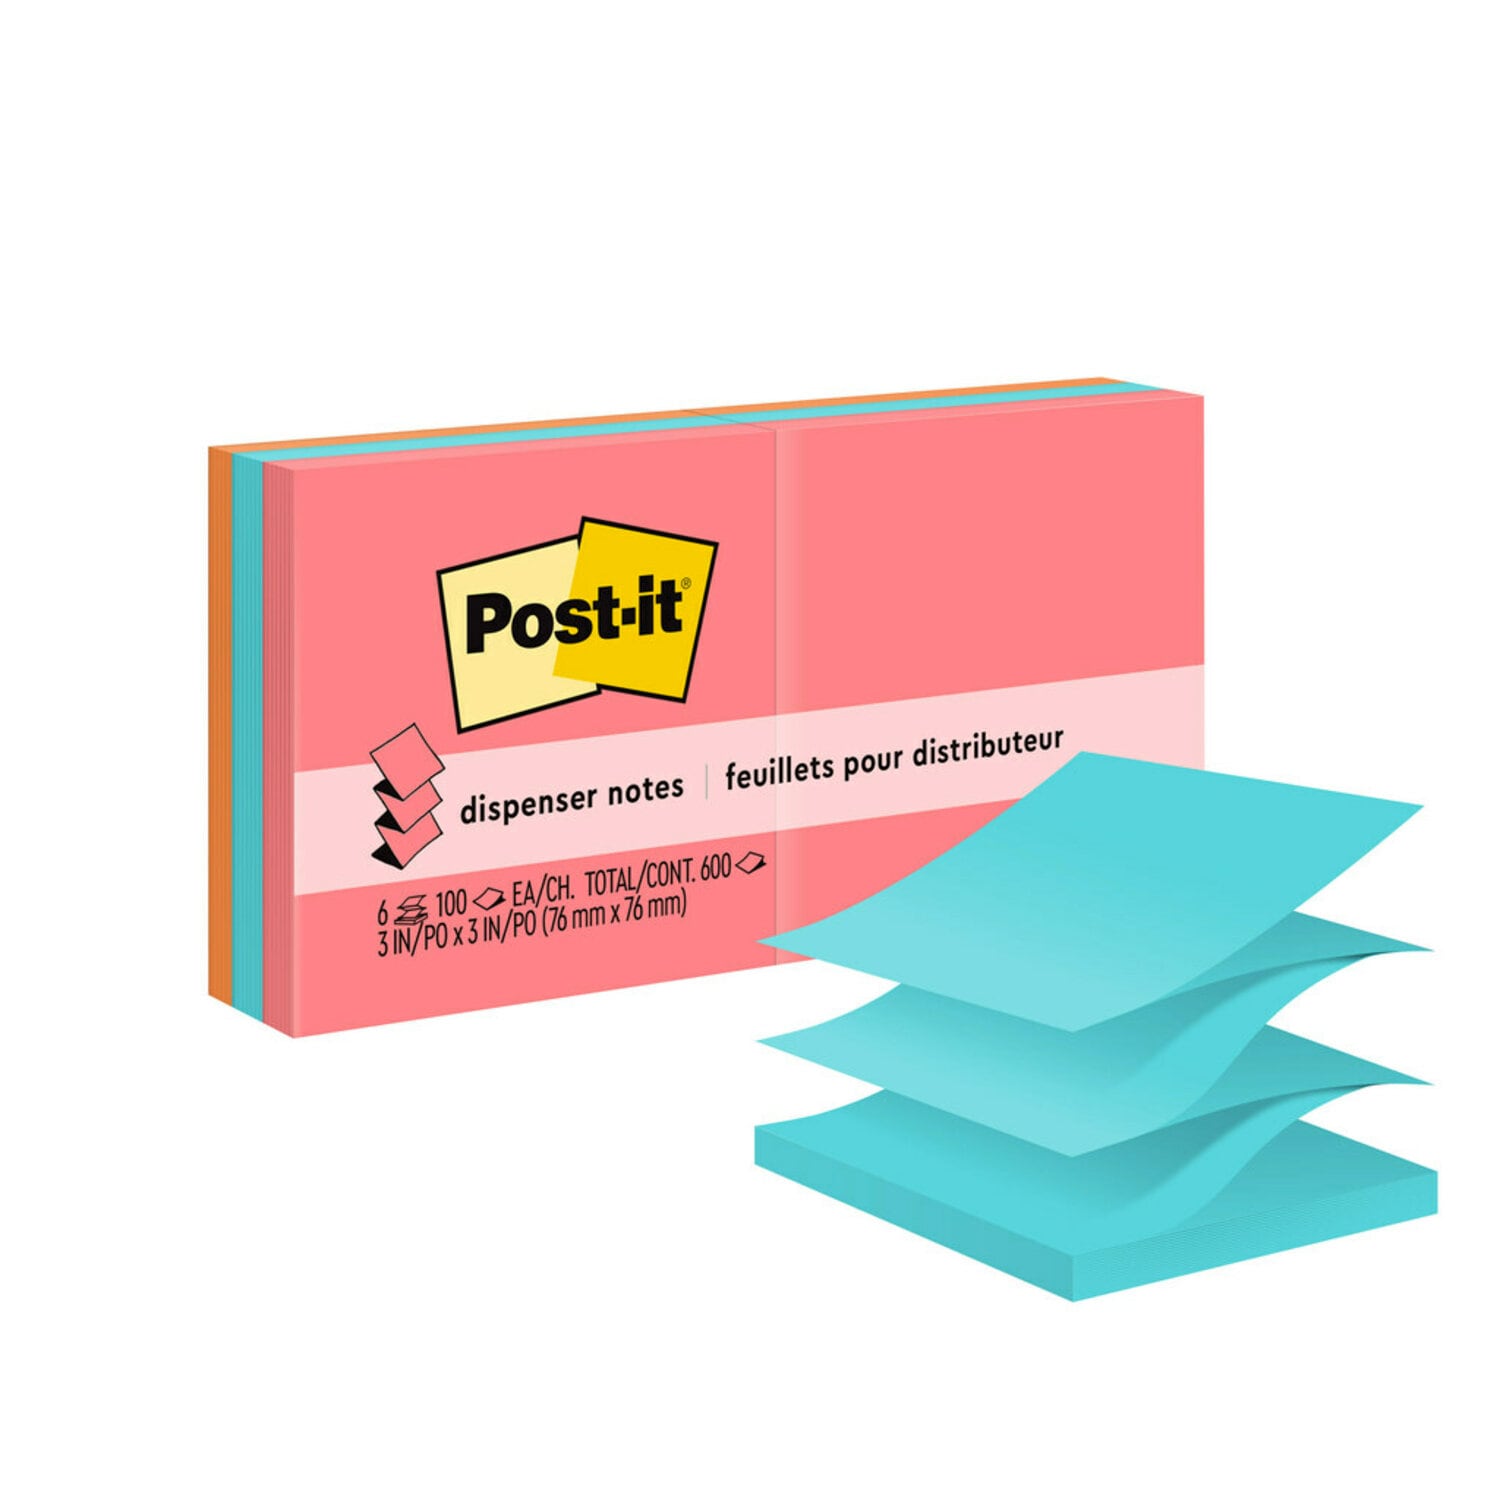 7100283424 - Post-it Pop-up Notes R330-AN, 3 in x 3 in (76 mm x 76 mm)